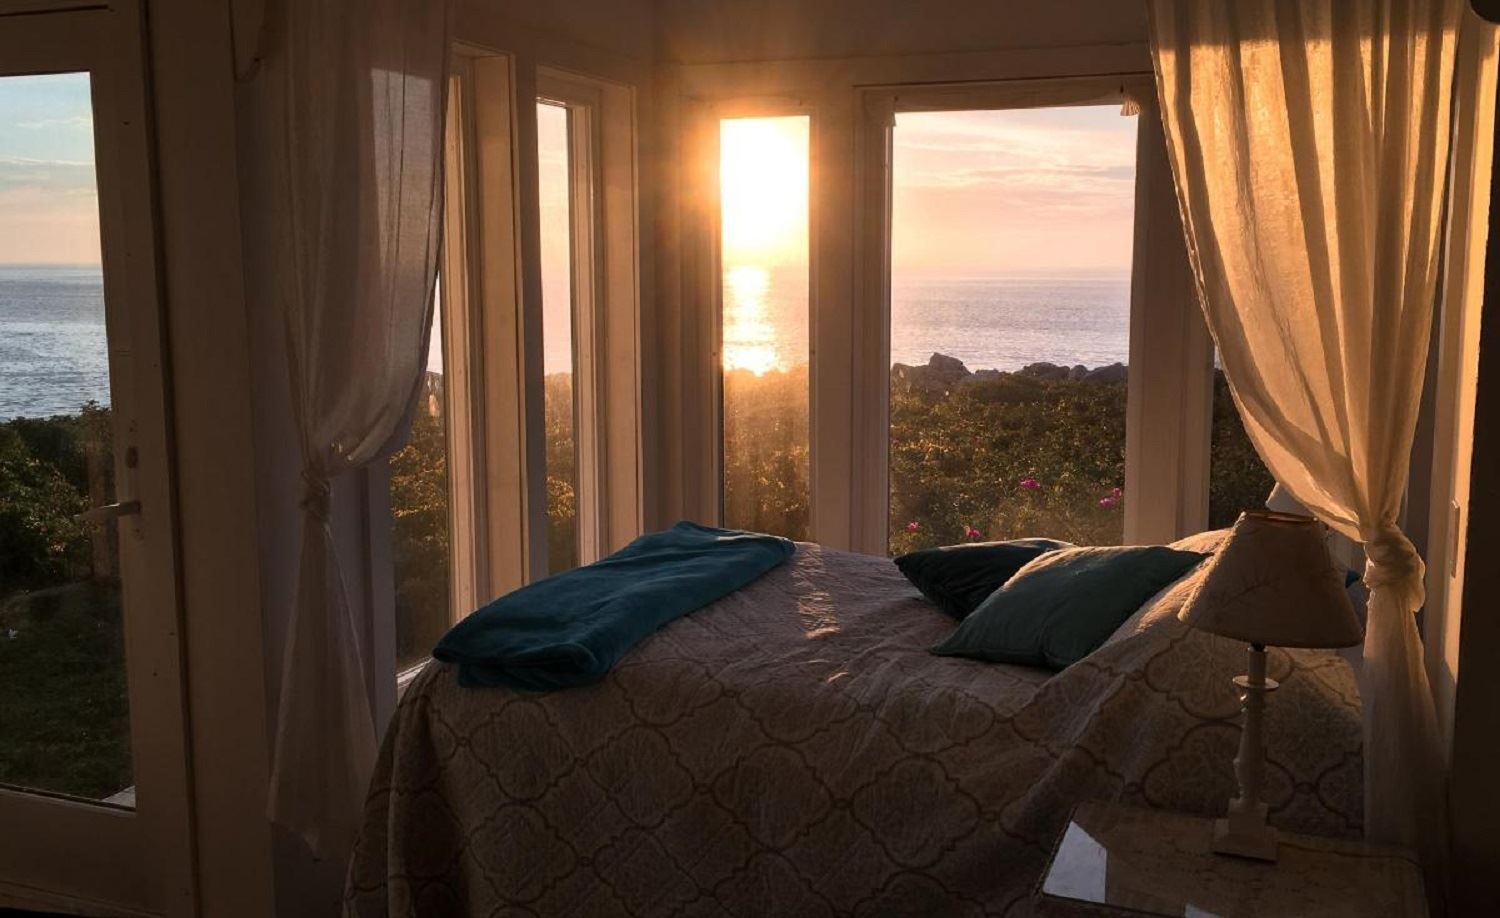 Great Duck Island House | Interior | Bed at sunset